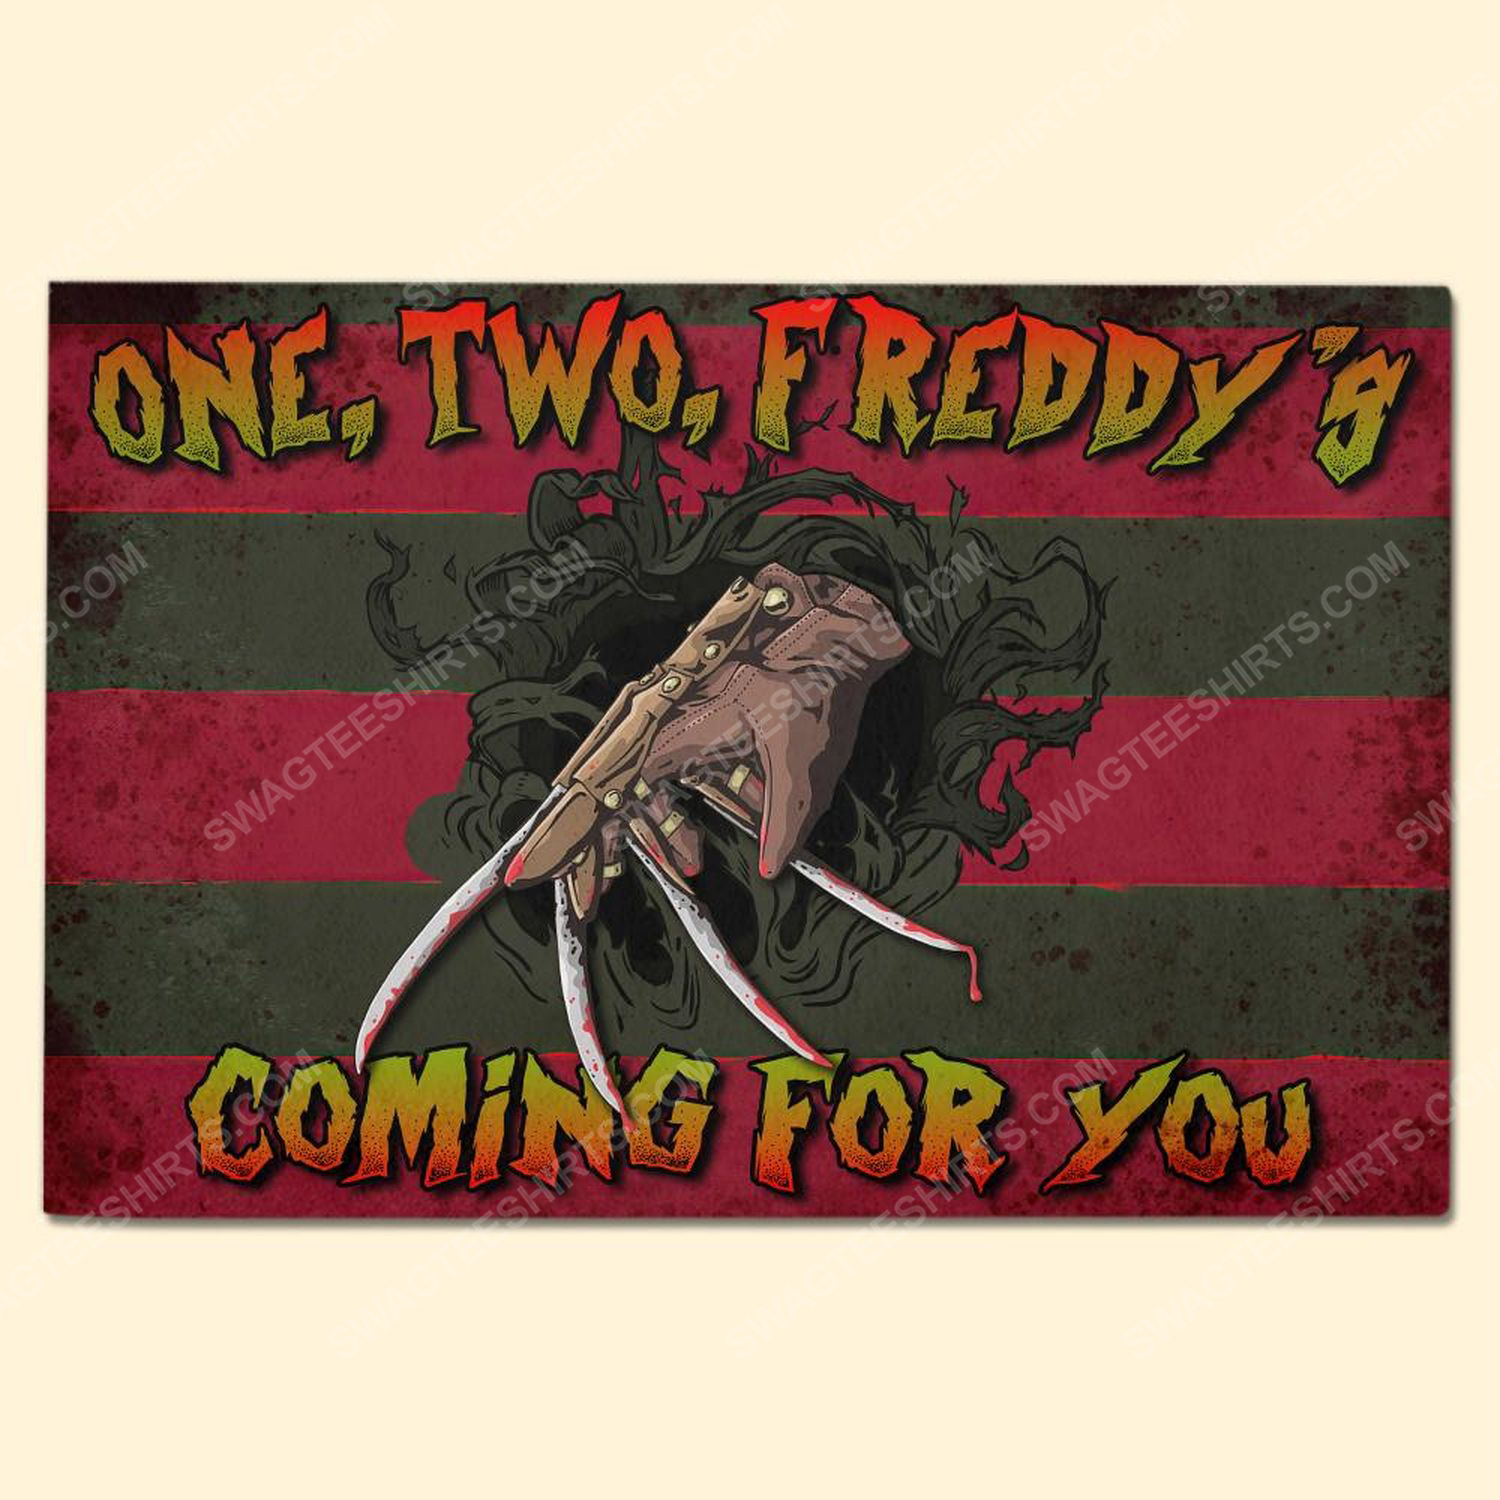 [special edition] Halloween freddy’s nightmares one two freddy’s coming for you doormat – maria